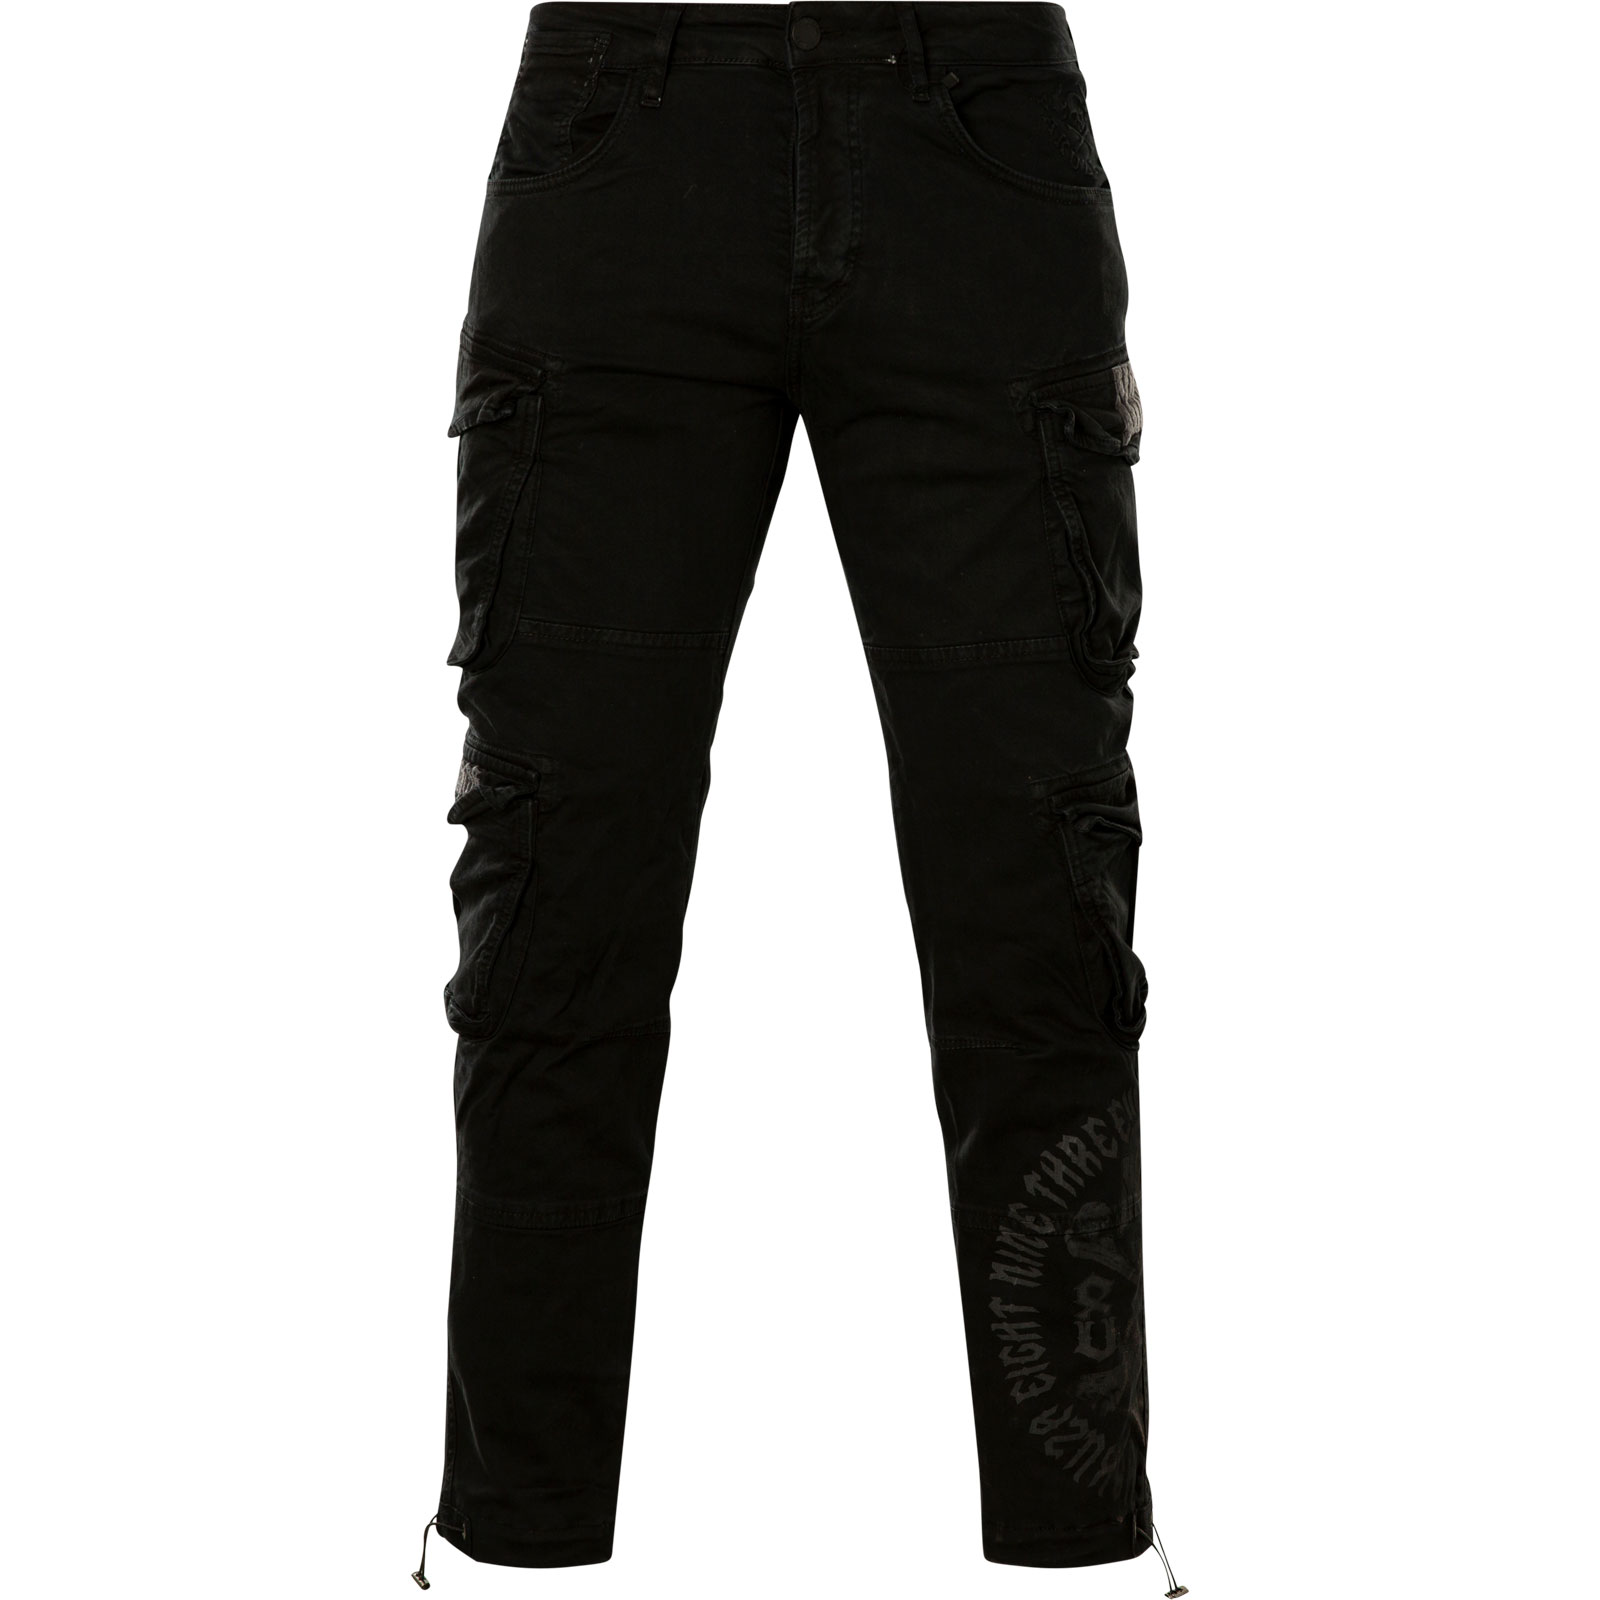 Yakuza Scary Loose Cargo Pants CPB-20063 in black with logo embroidery ...